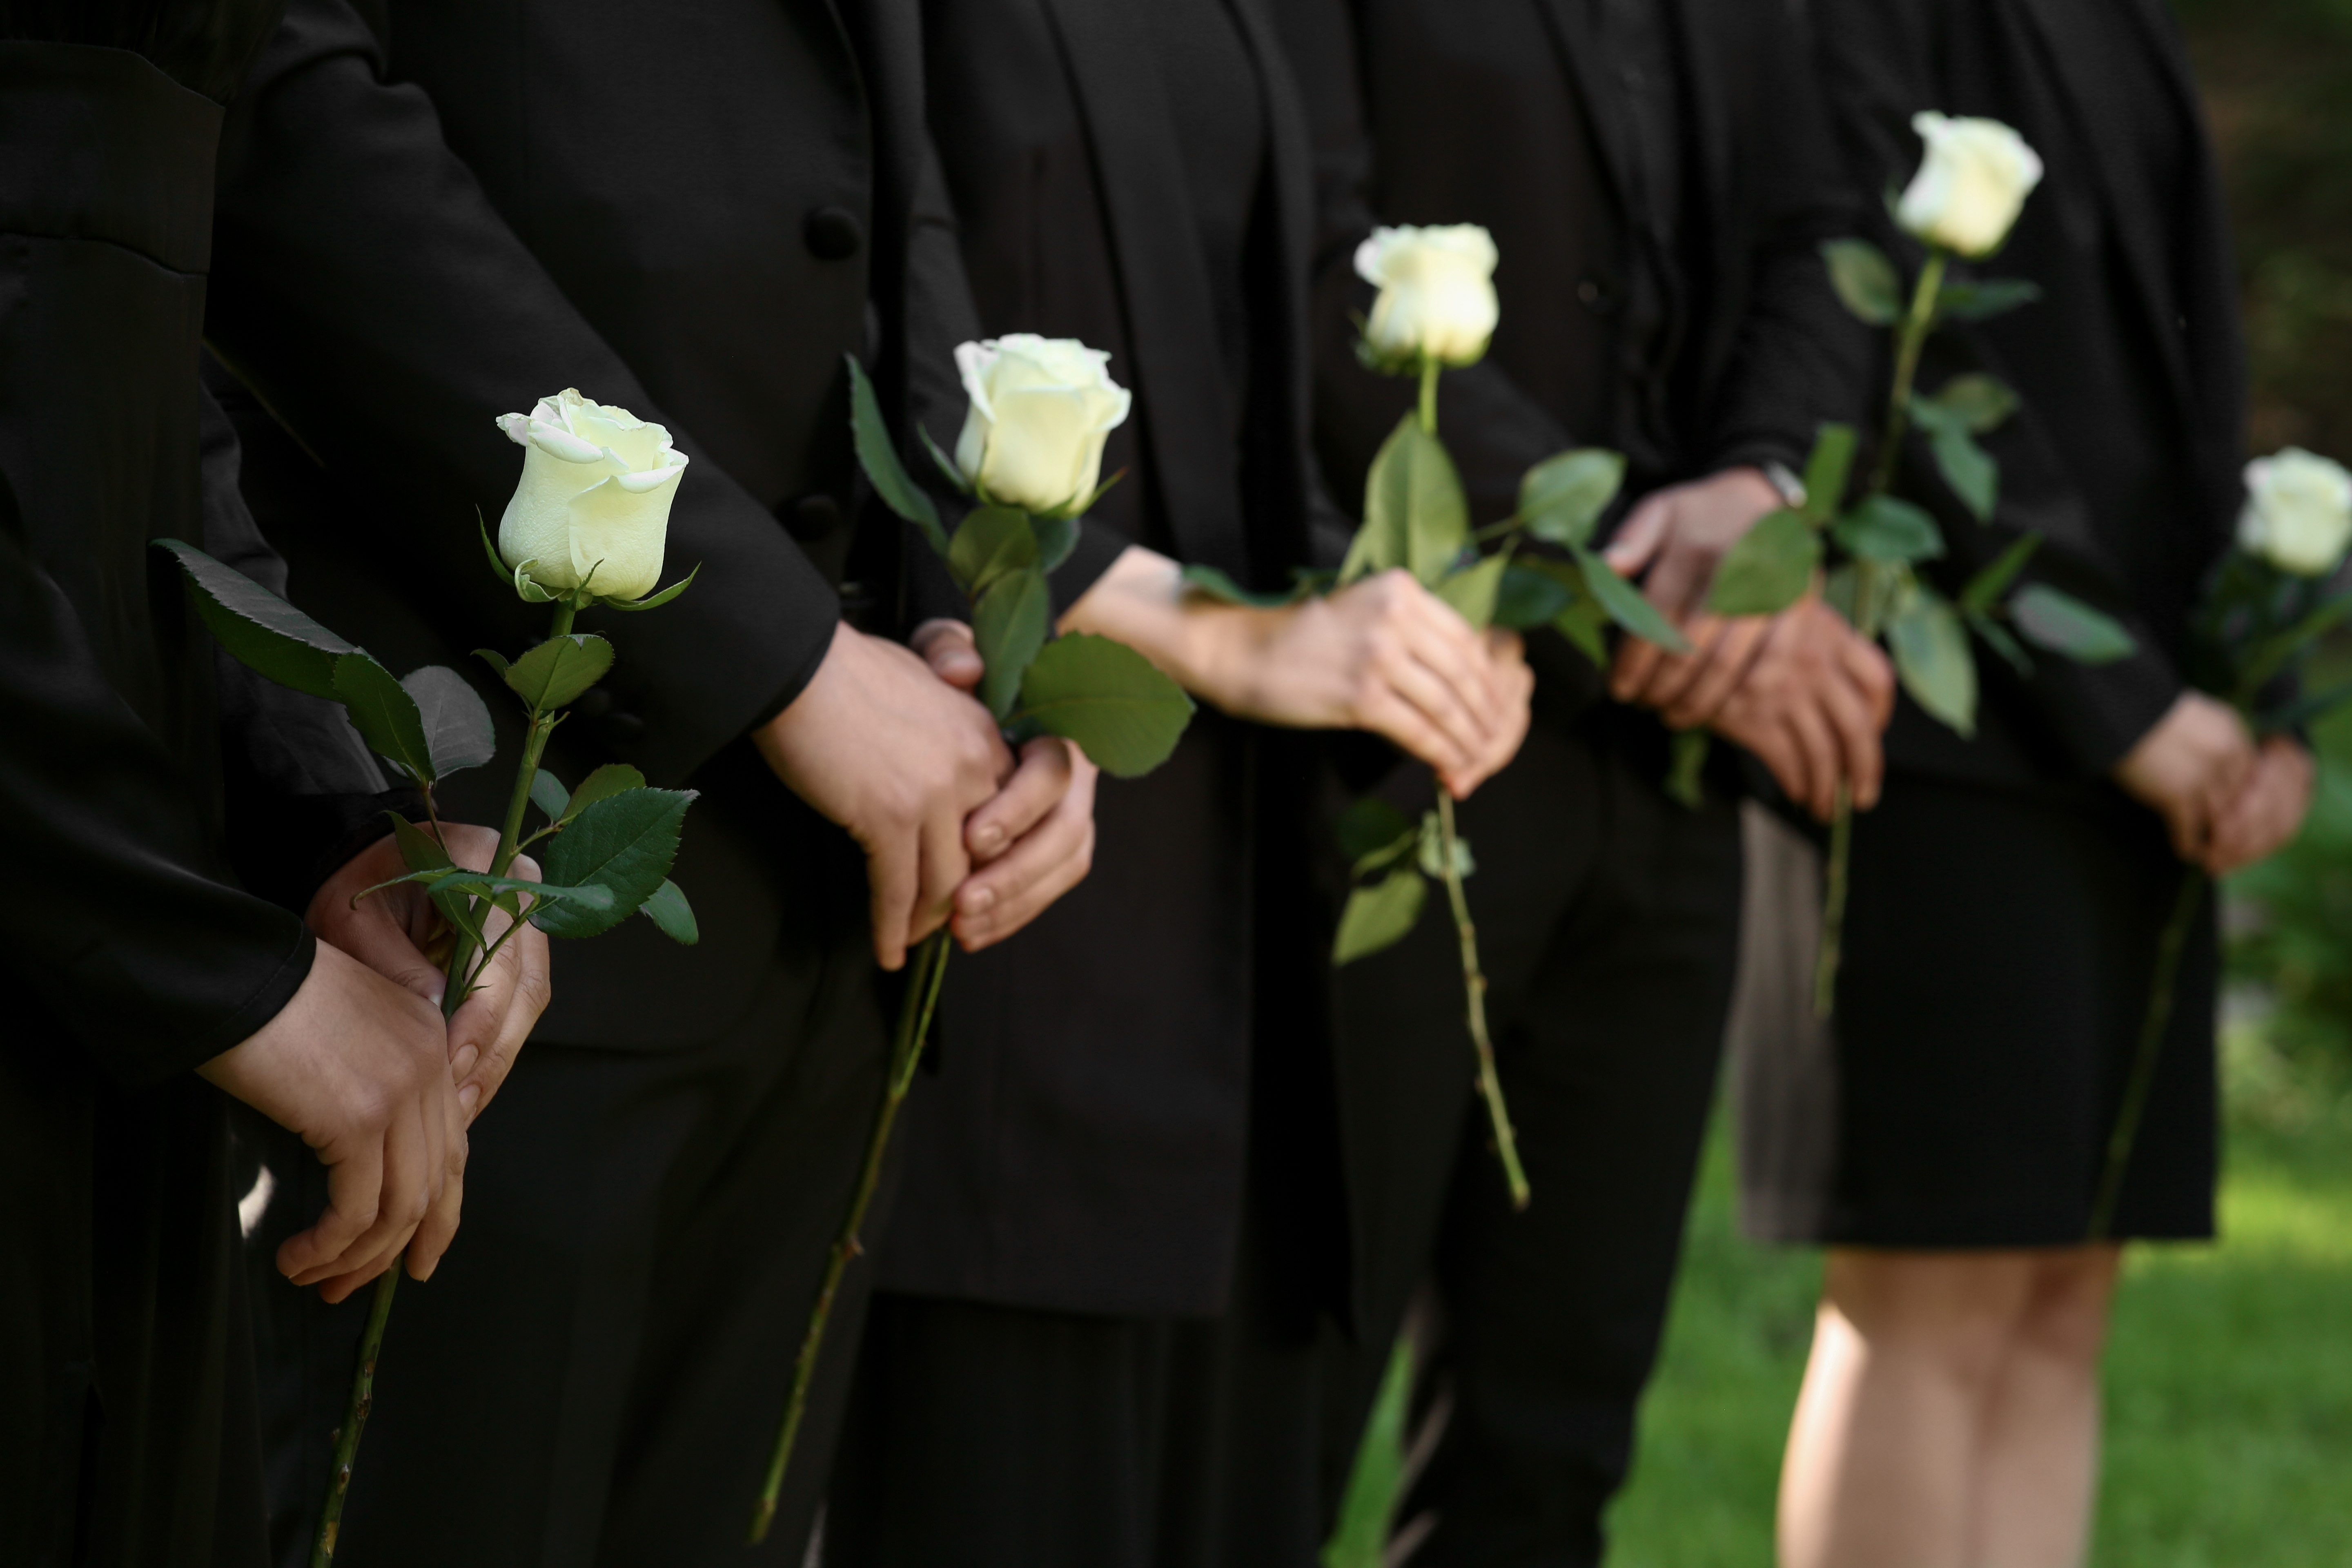 A family holding roses at a funeral | Source: Shutterstock